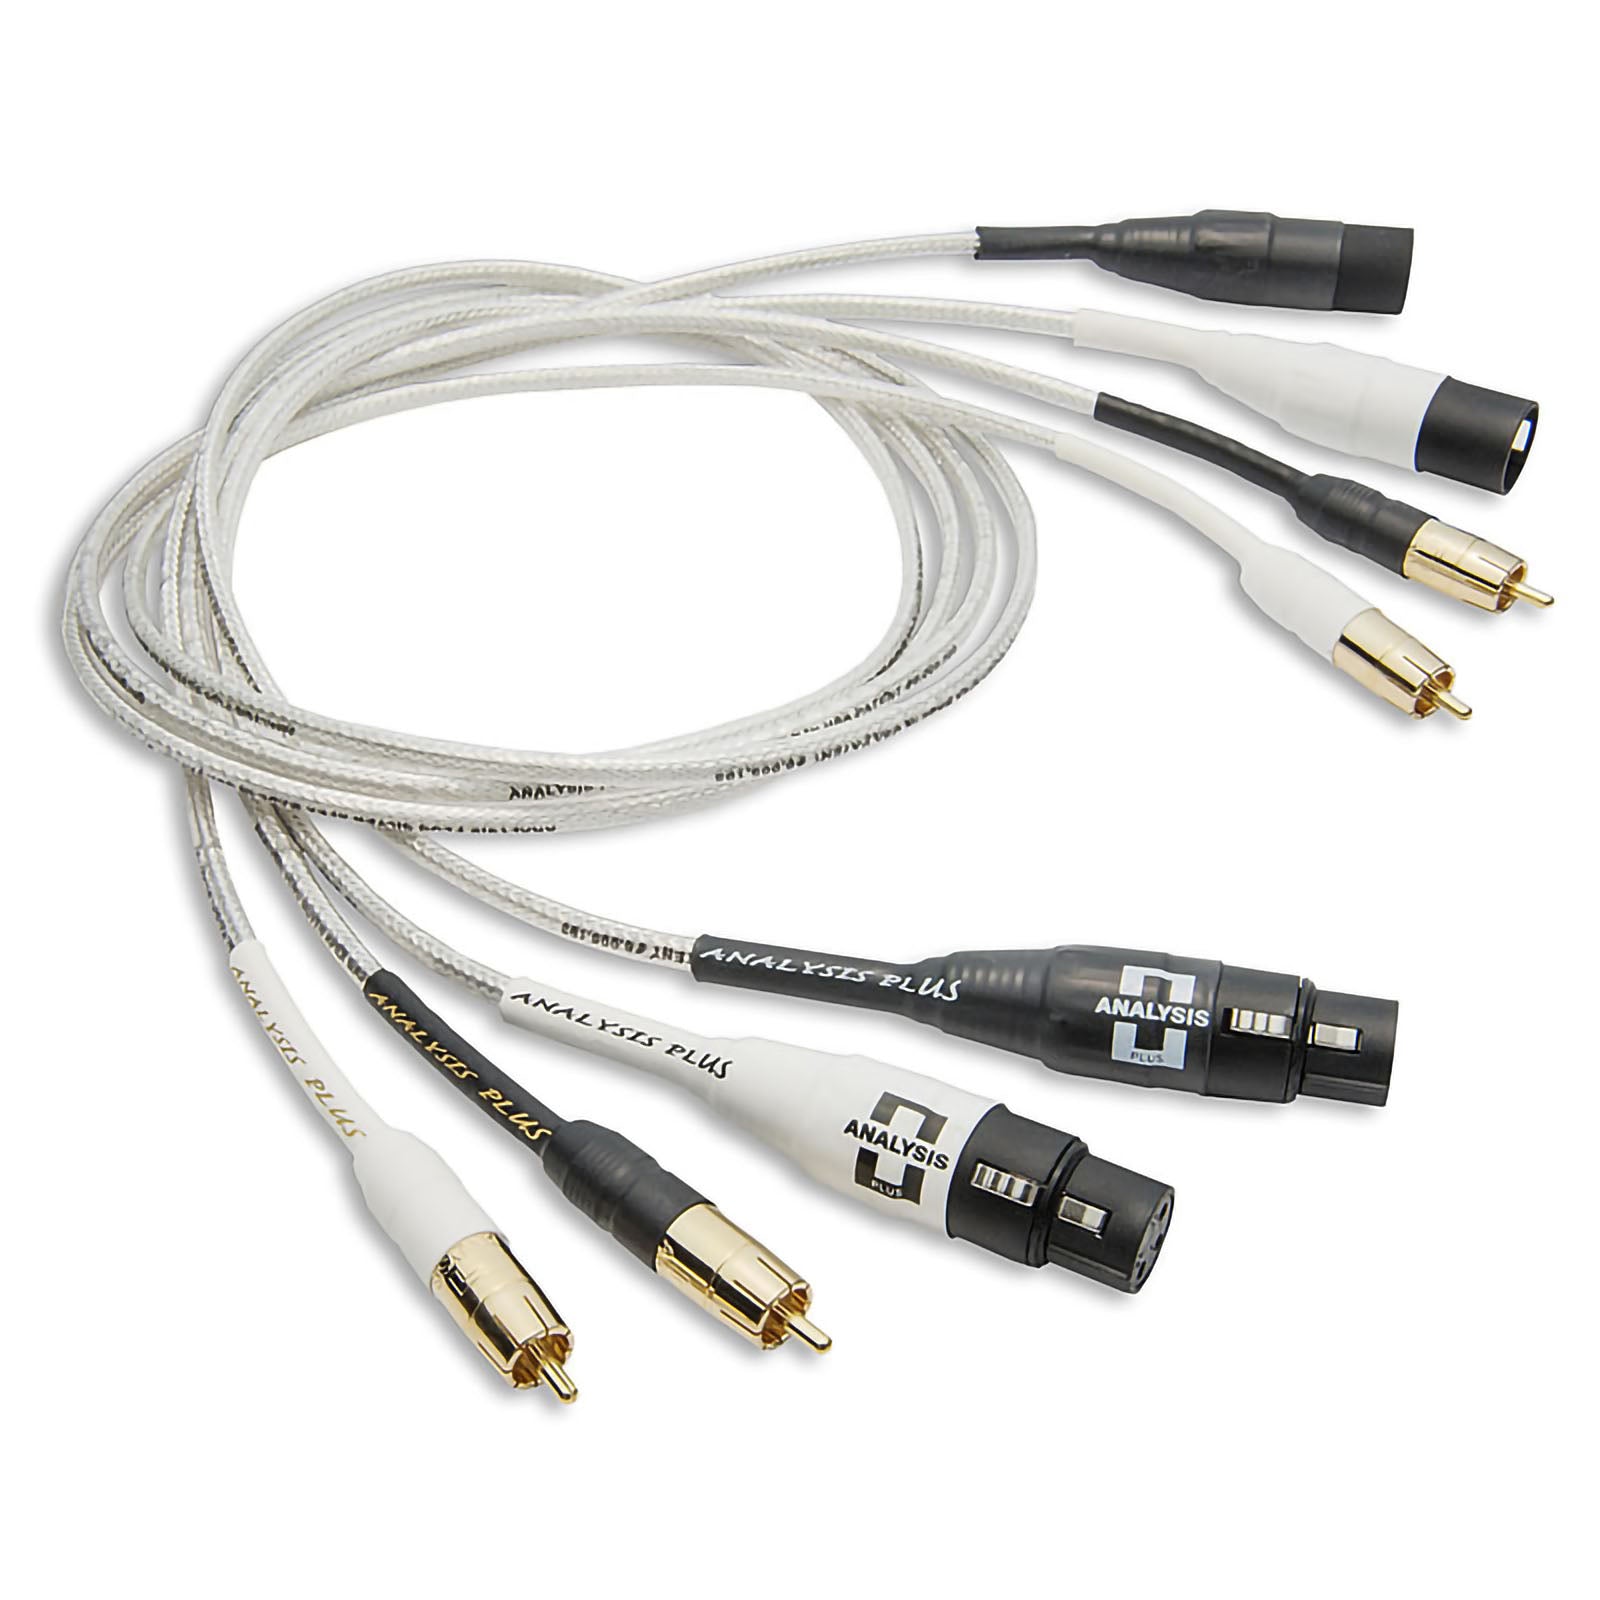 Analysis Plus Silver Apex Interconnect Cable